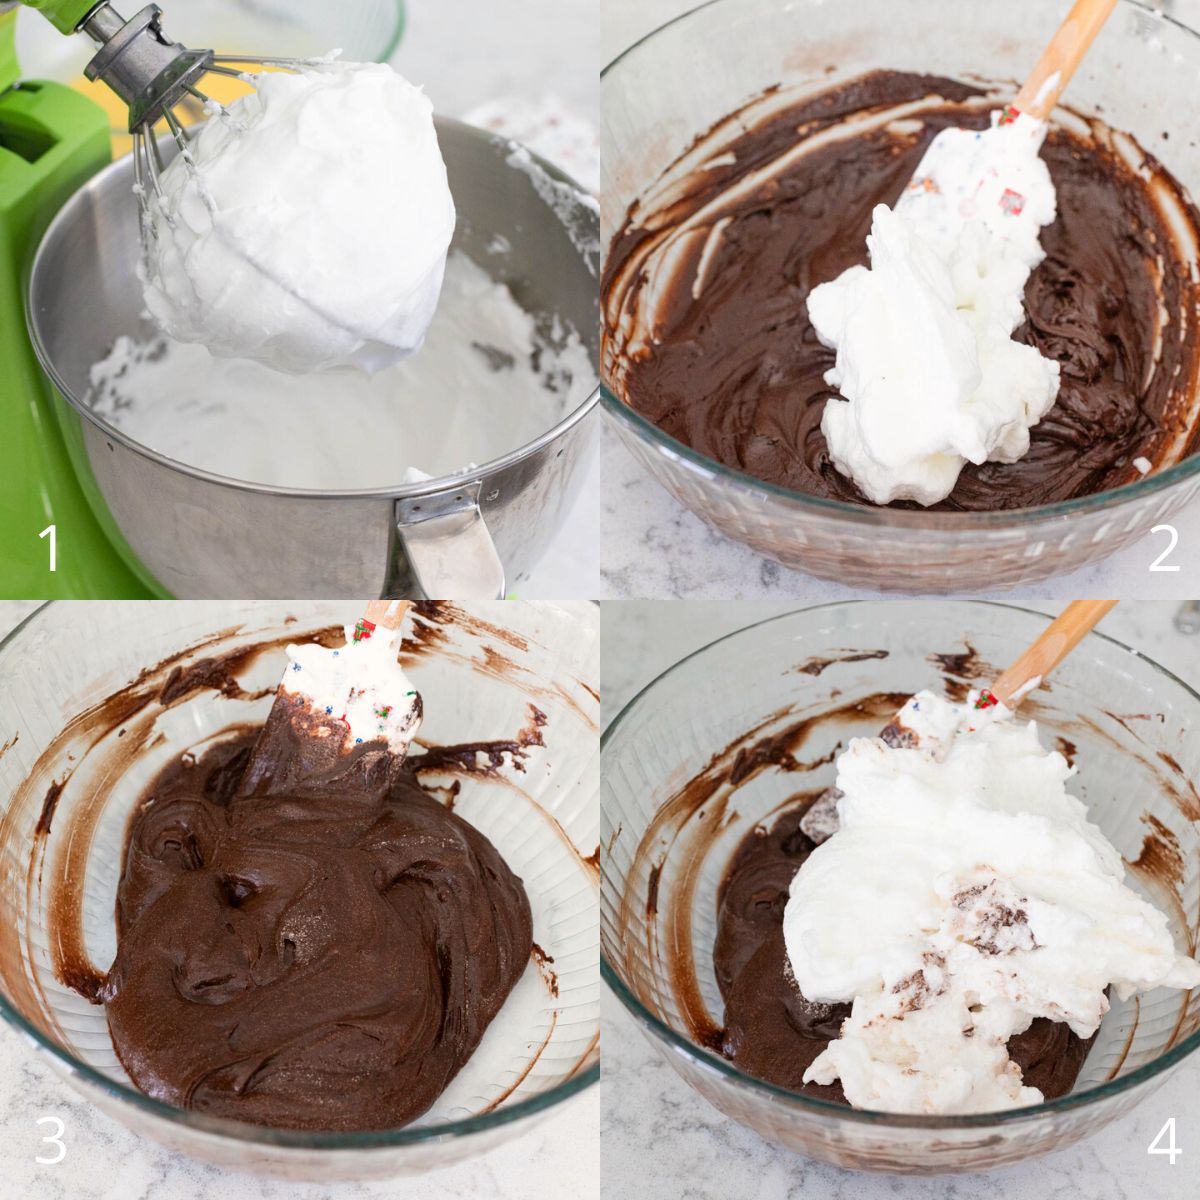 The step by step photos show how to whip the egg whites and then fold them into the chocolate cake batter.